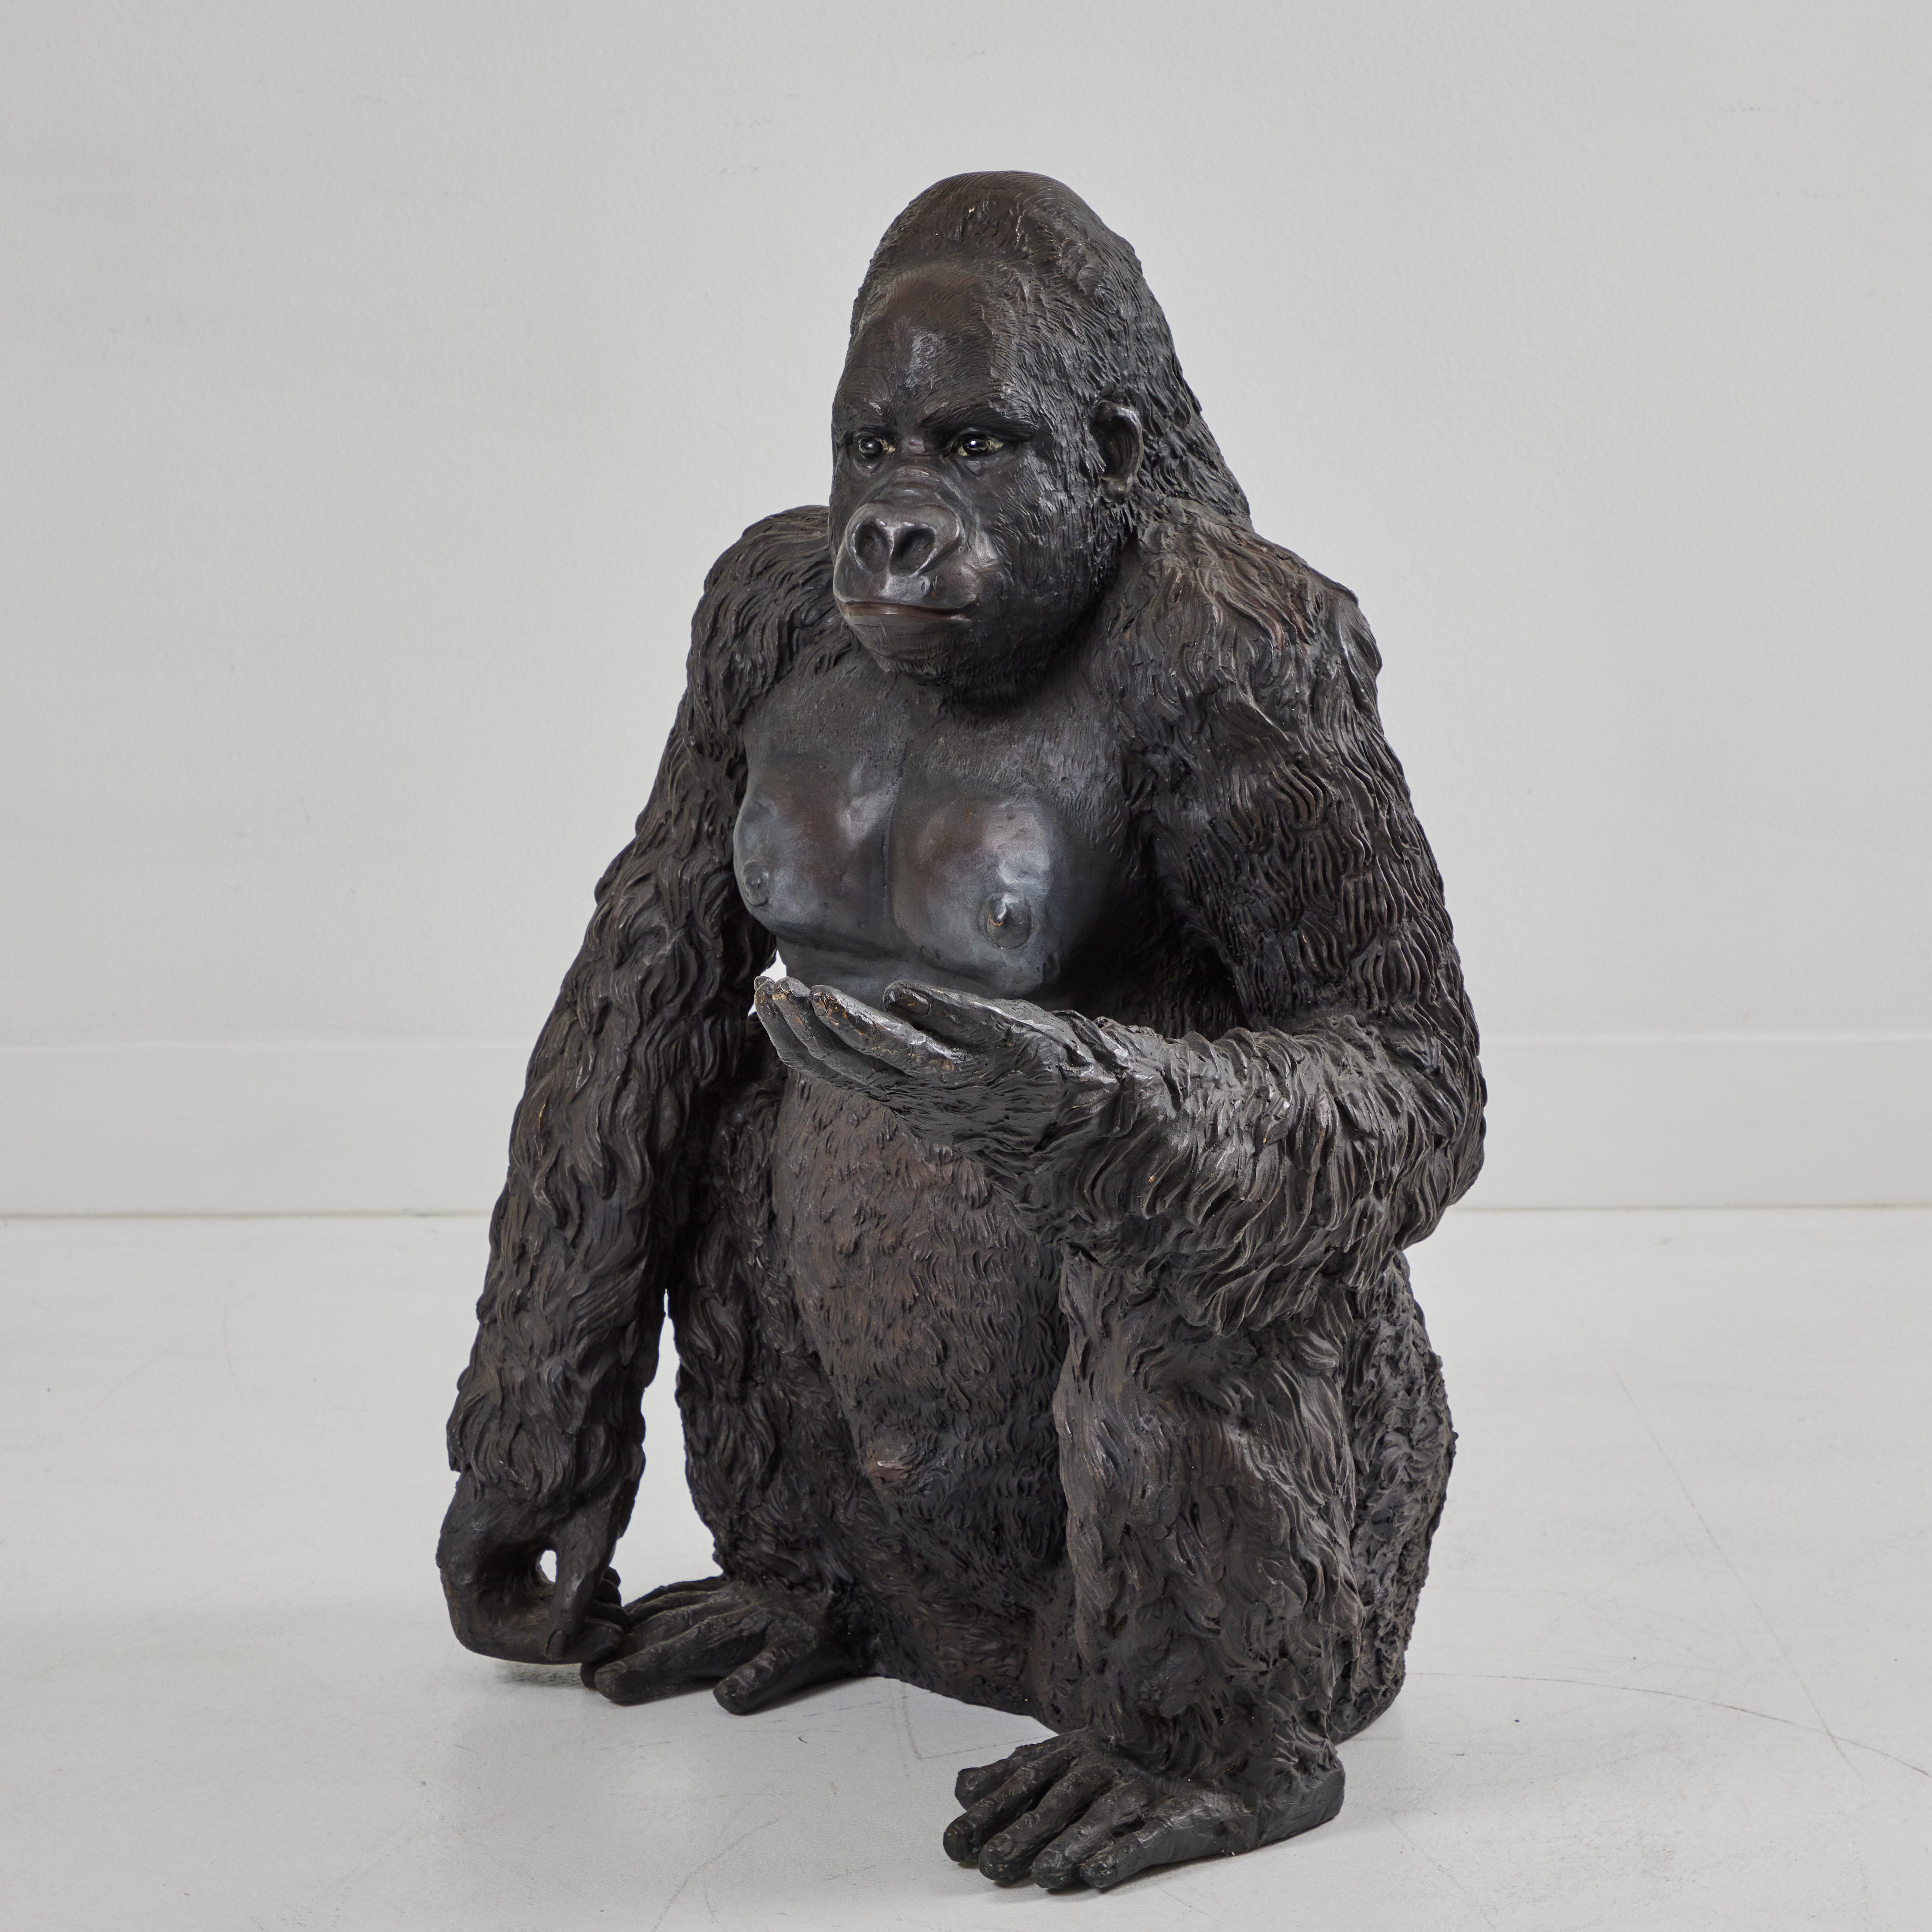 This bronze gorilla sits astutely with it's left hand out and it's right arm relaxed to the ground. The glass eyes are black and reflect surrounding light and give this fella a compassionate and life like face. The sculpture is heavily textured